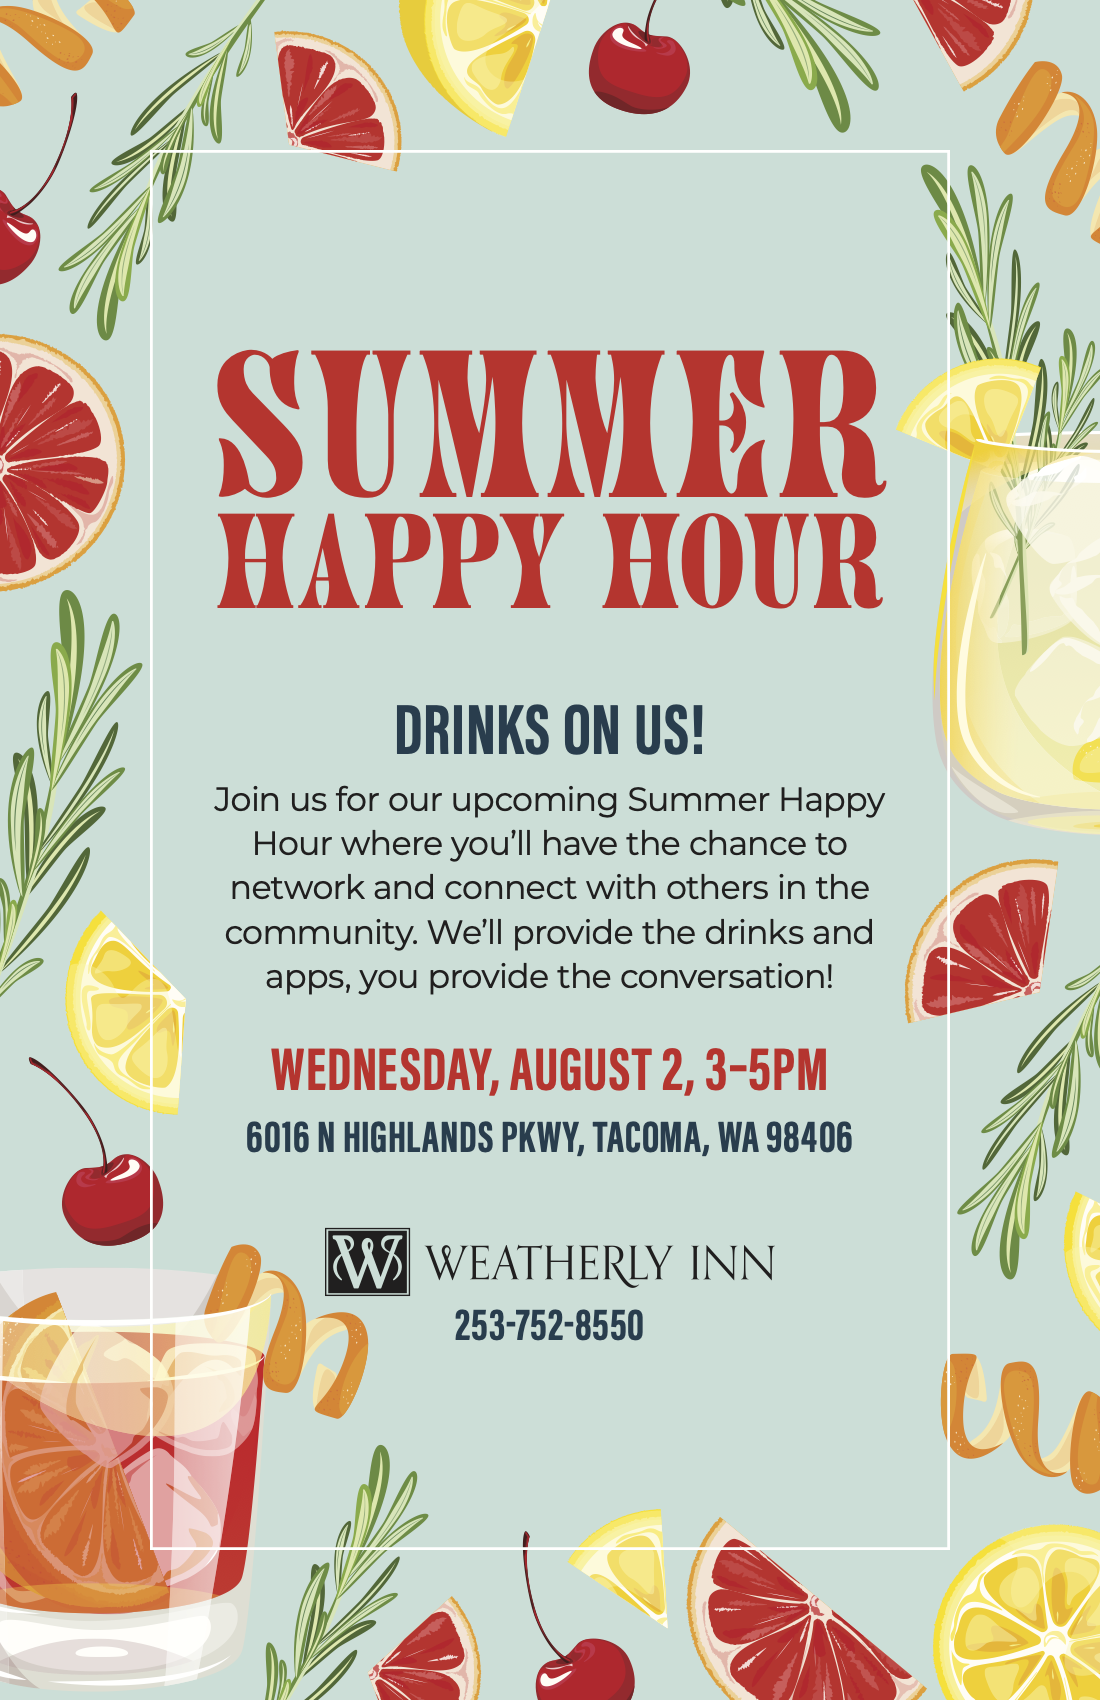 202306_WEATH_Tacoma_Summer Happy Hour_Flyer_8x5_PROOF (1) copy